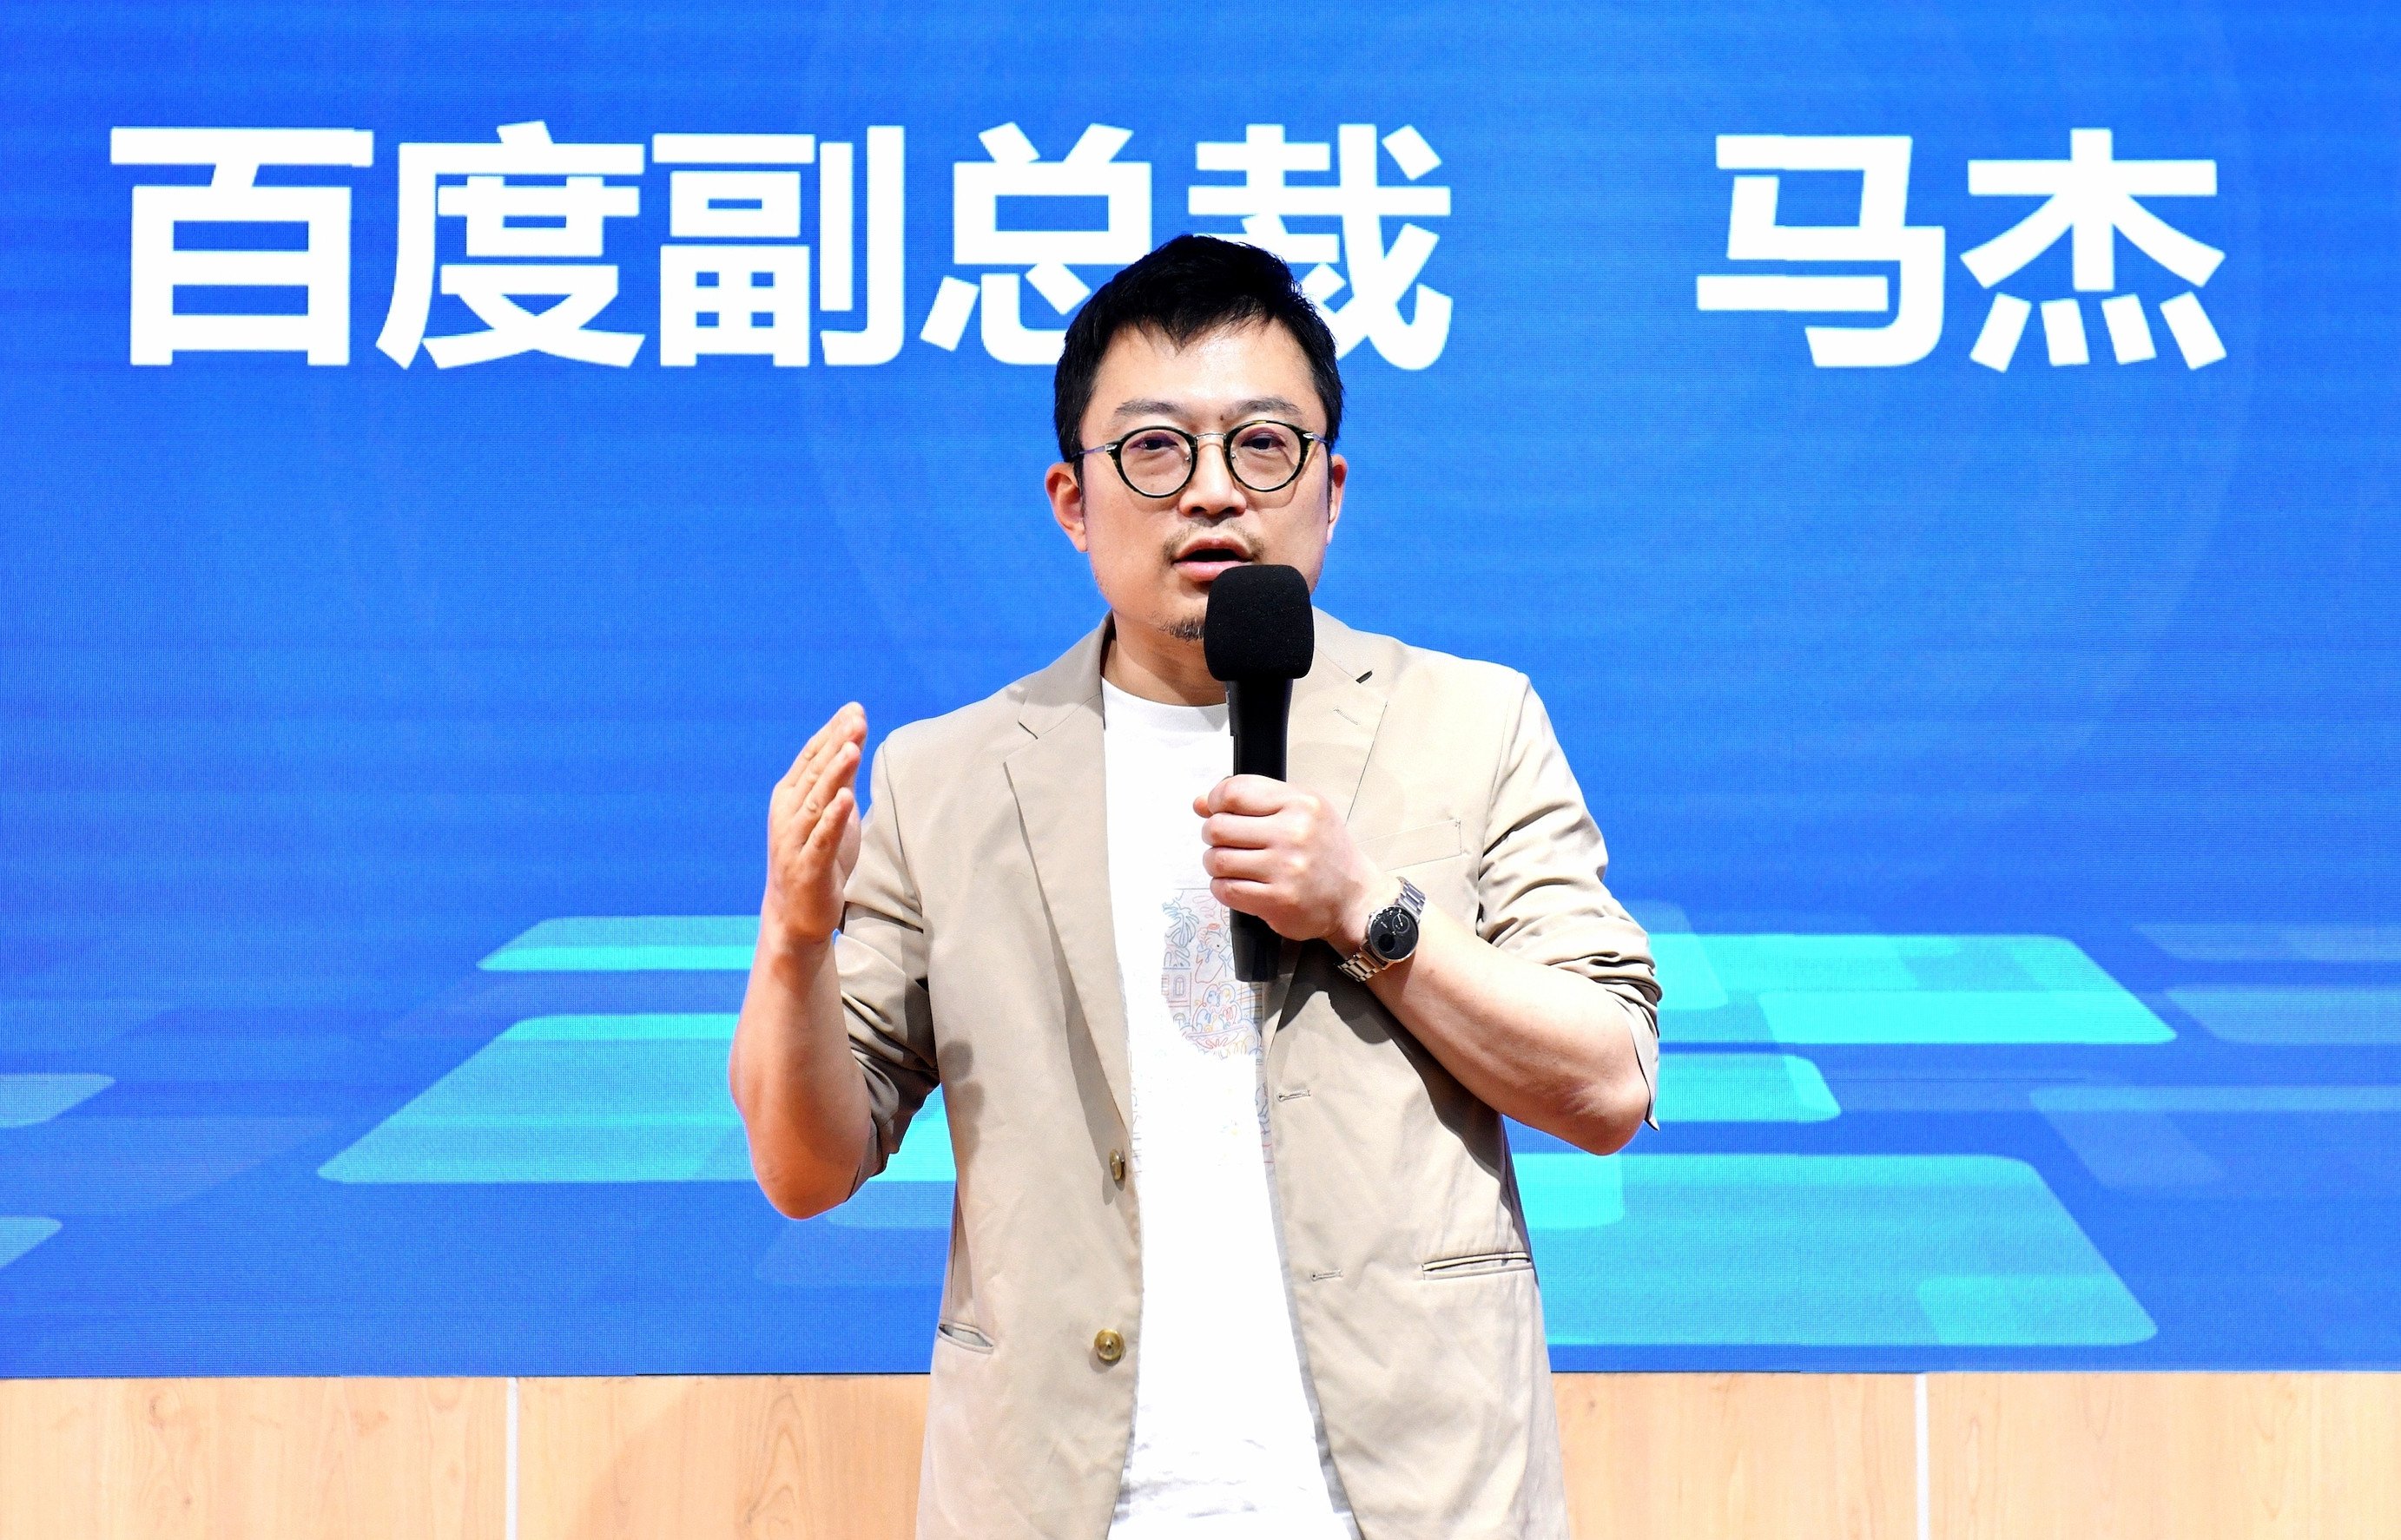 Ma Jie, who was in charge of Baidu’s metaverse project, has left the company. Photo: Handout